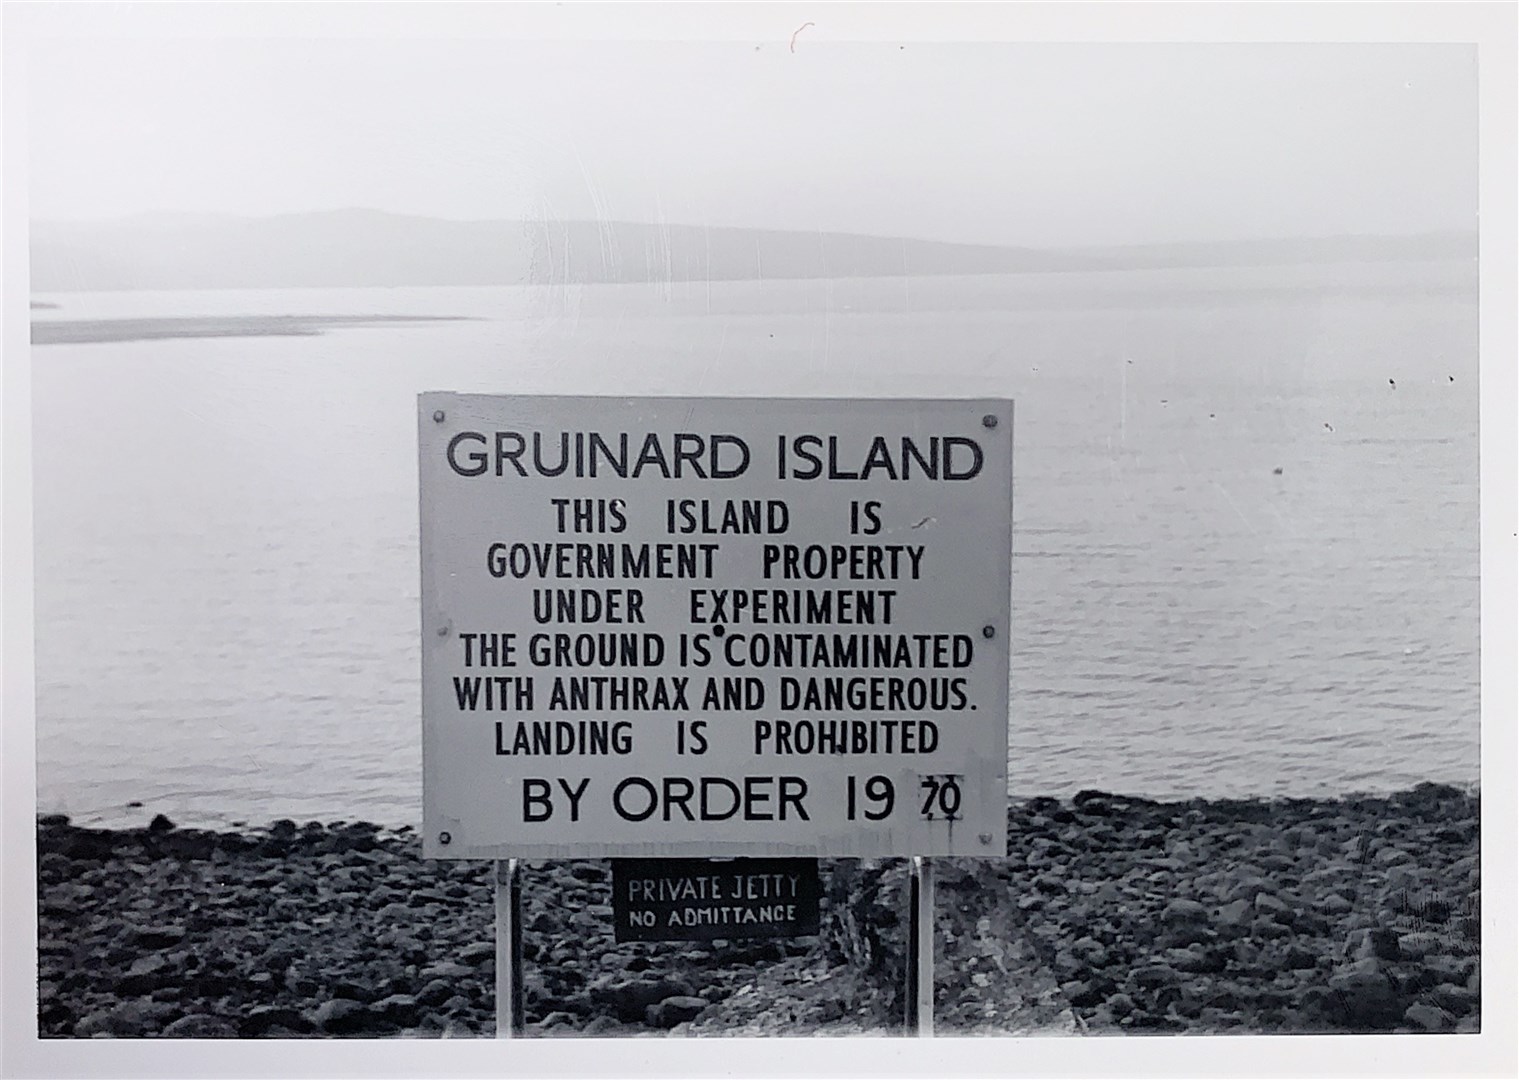 The government eventually had to come clean about what had happened on Gruinard Island.